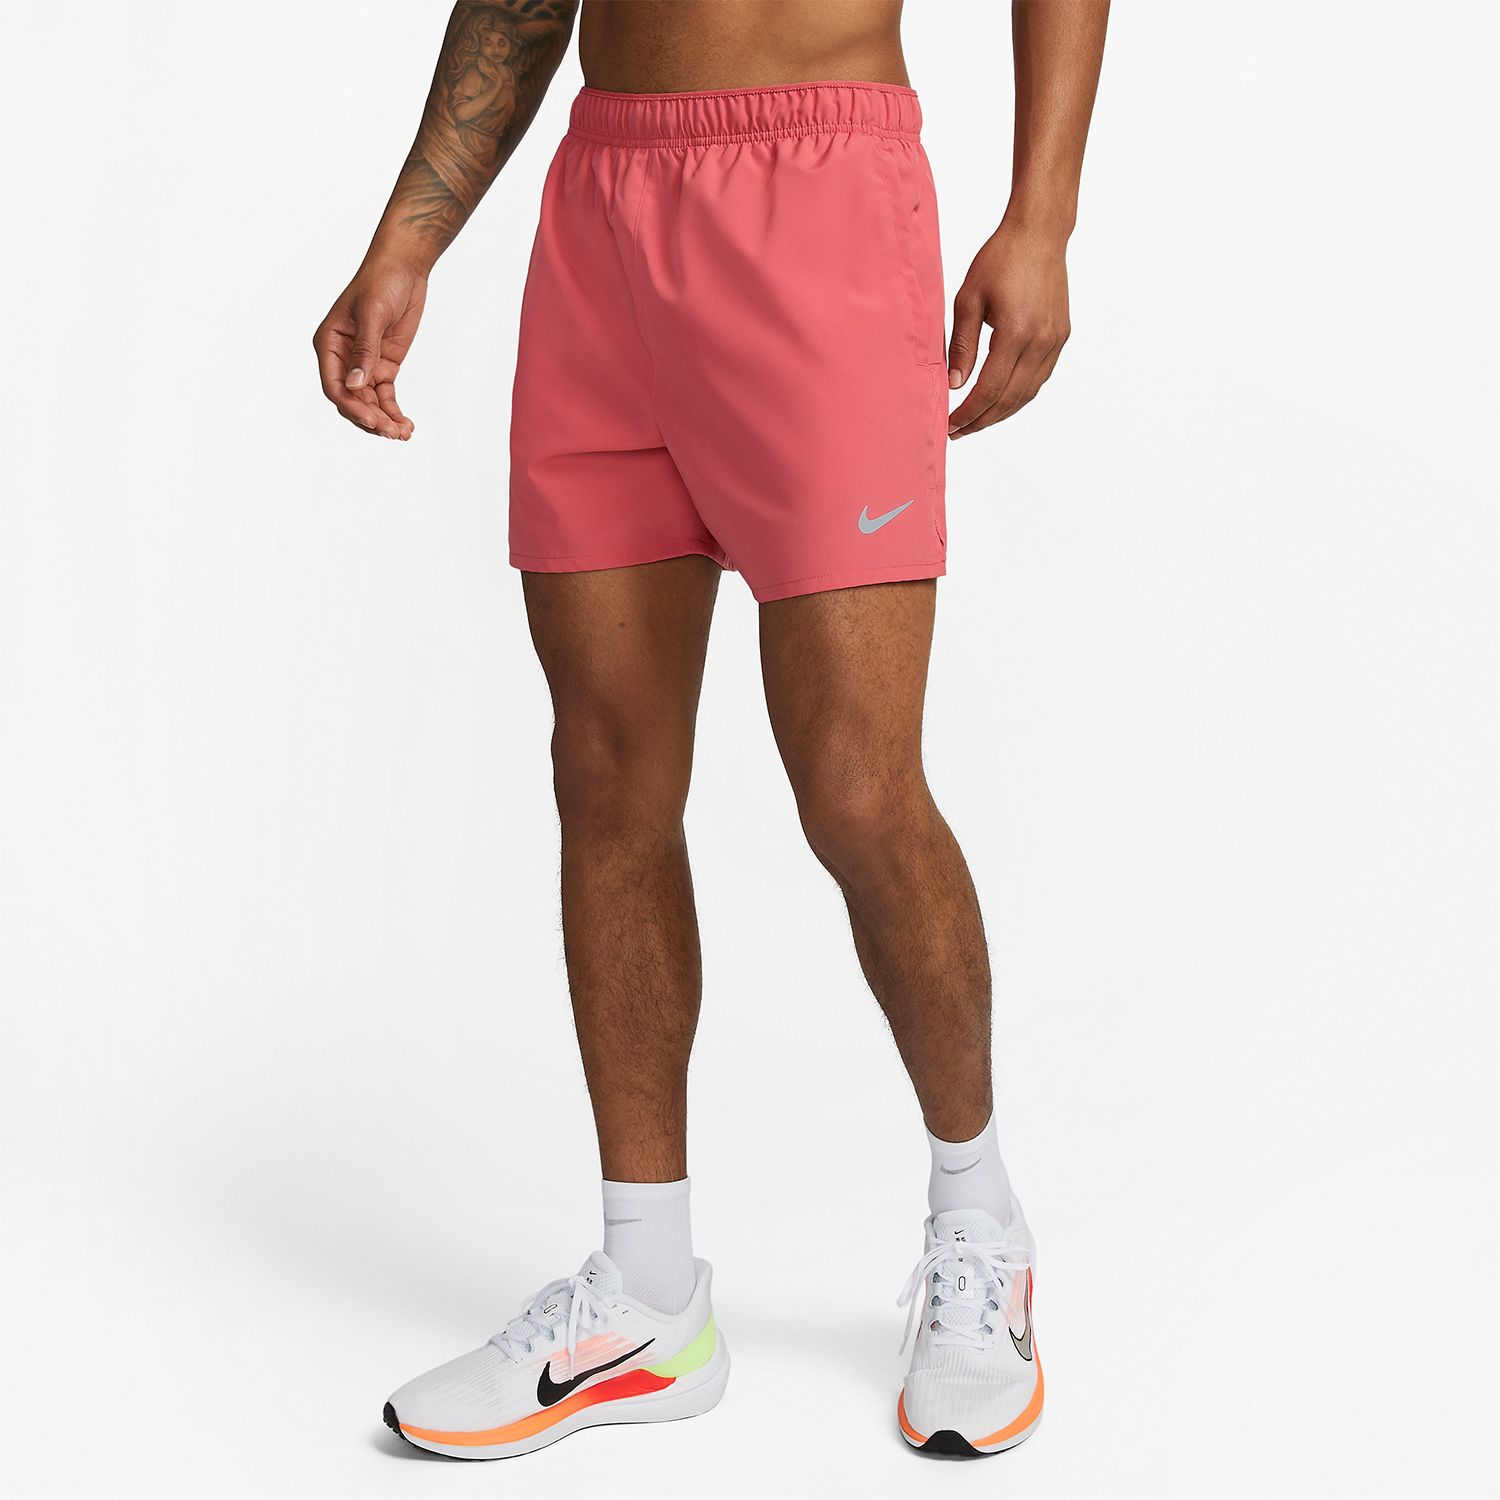 Nike Challenger 5in Shorts - Adobe/Black/Reflective Silver